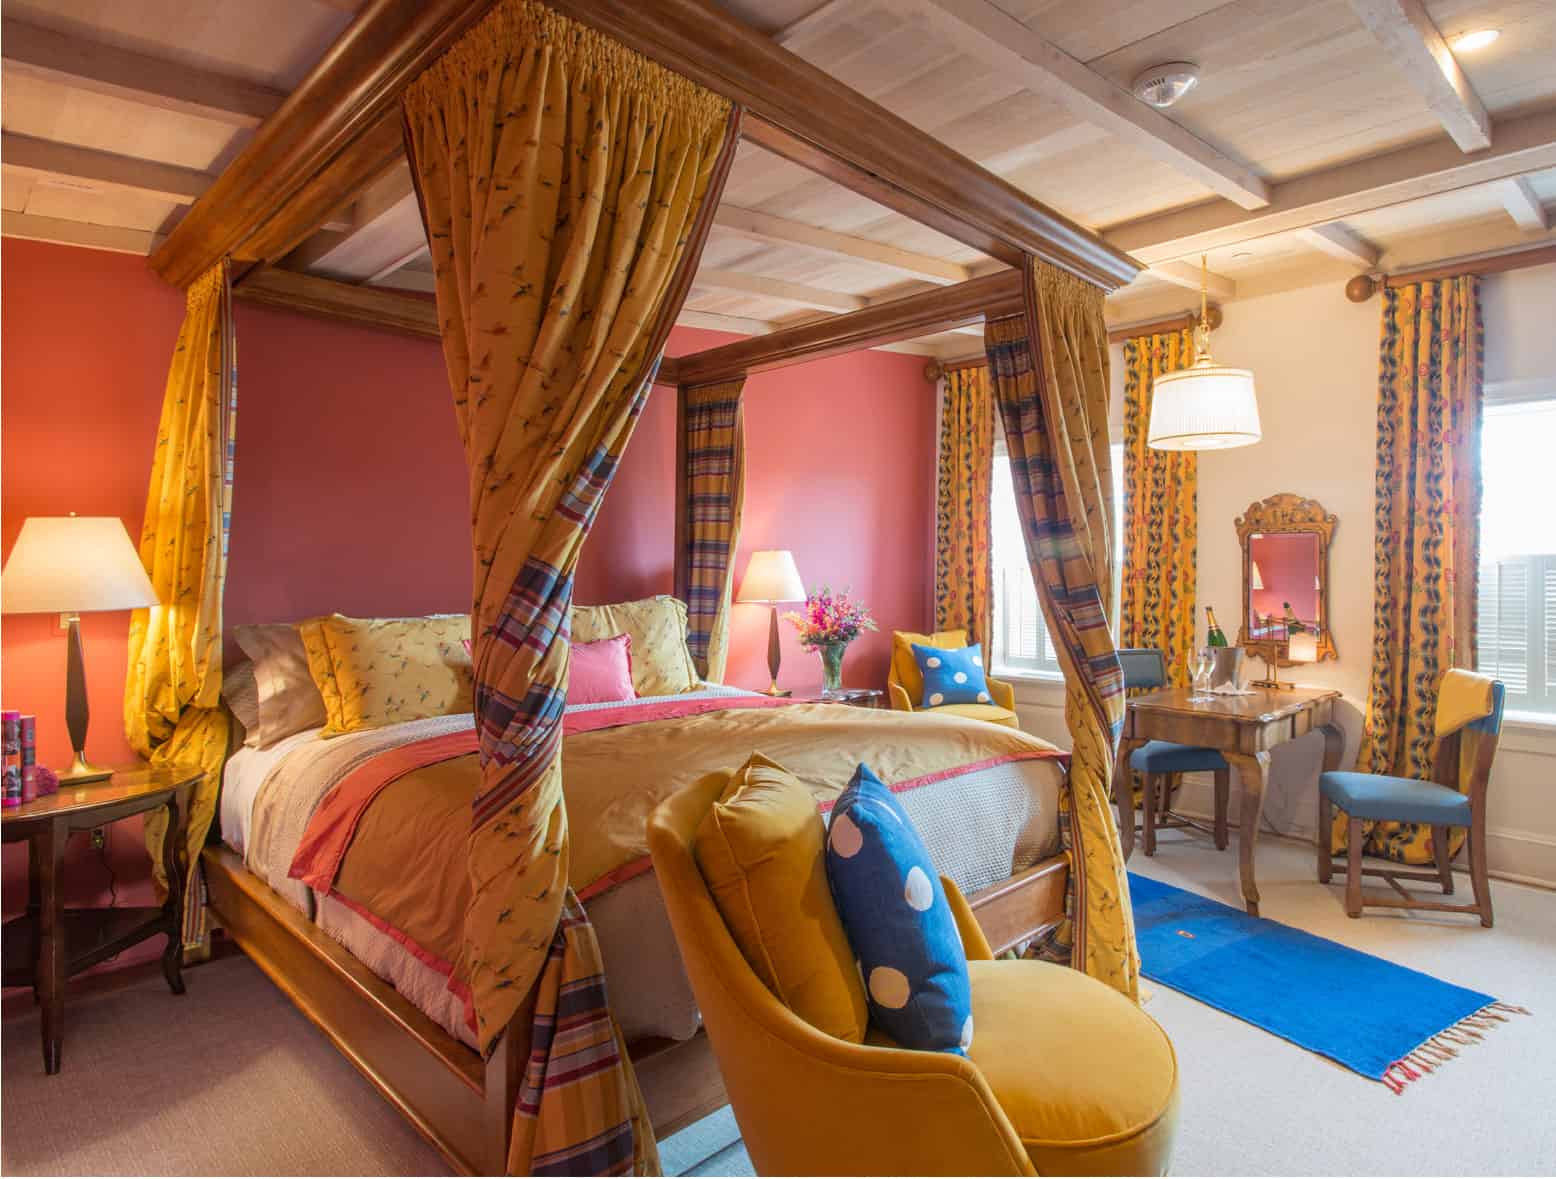 Front perspective view of the four poster bed inside the Ivy Hotel Baltimore. The bedroom goes for a storybook theme, with golds and a pattern for the canopy drapes. A contrasting blue pillow rests on the chair in front